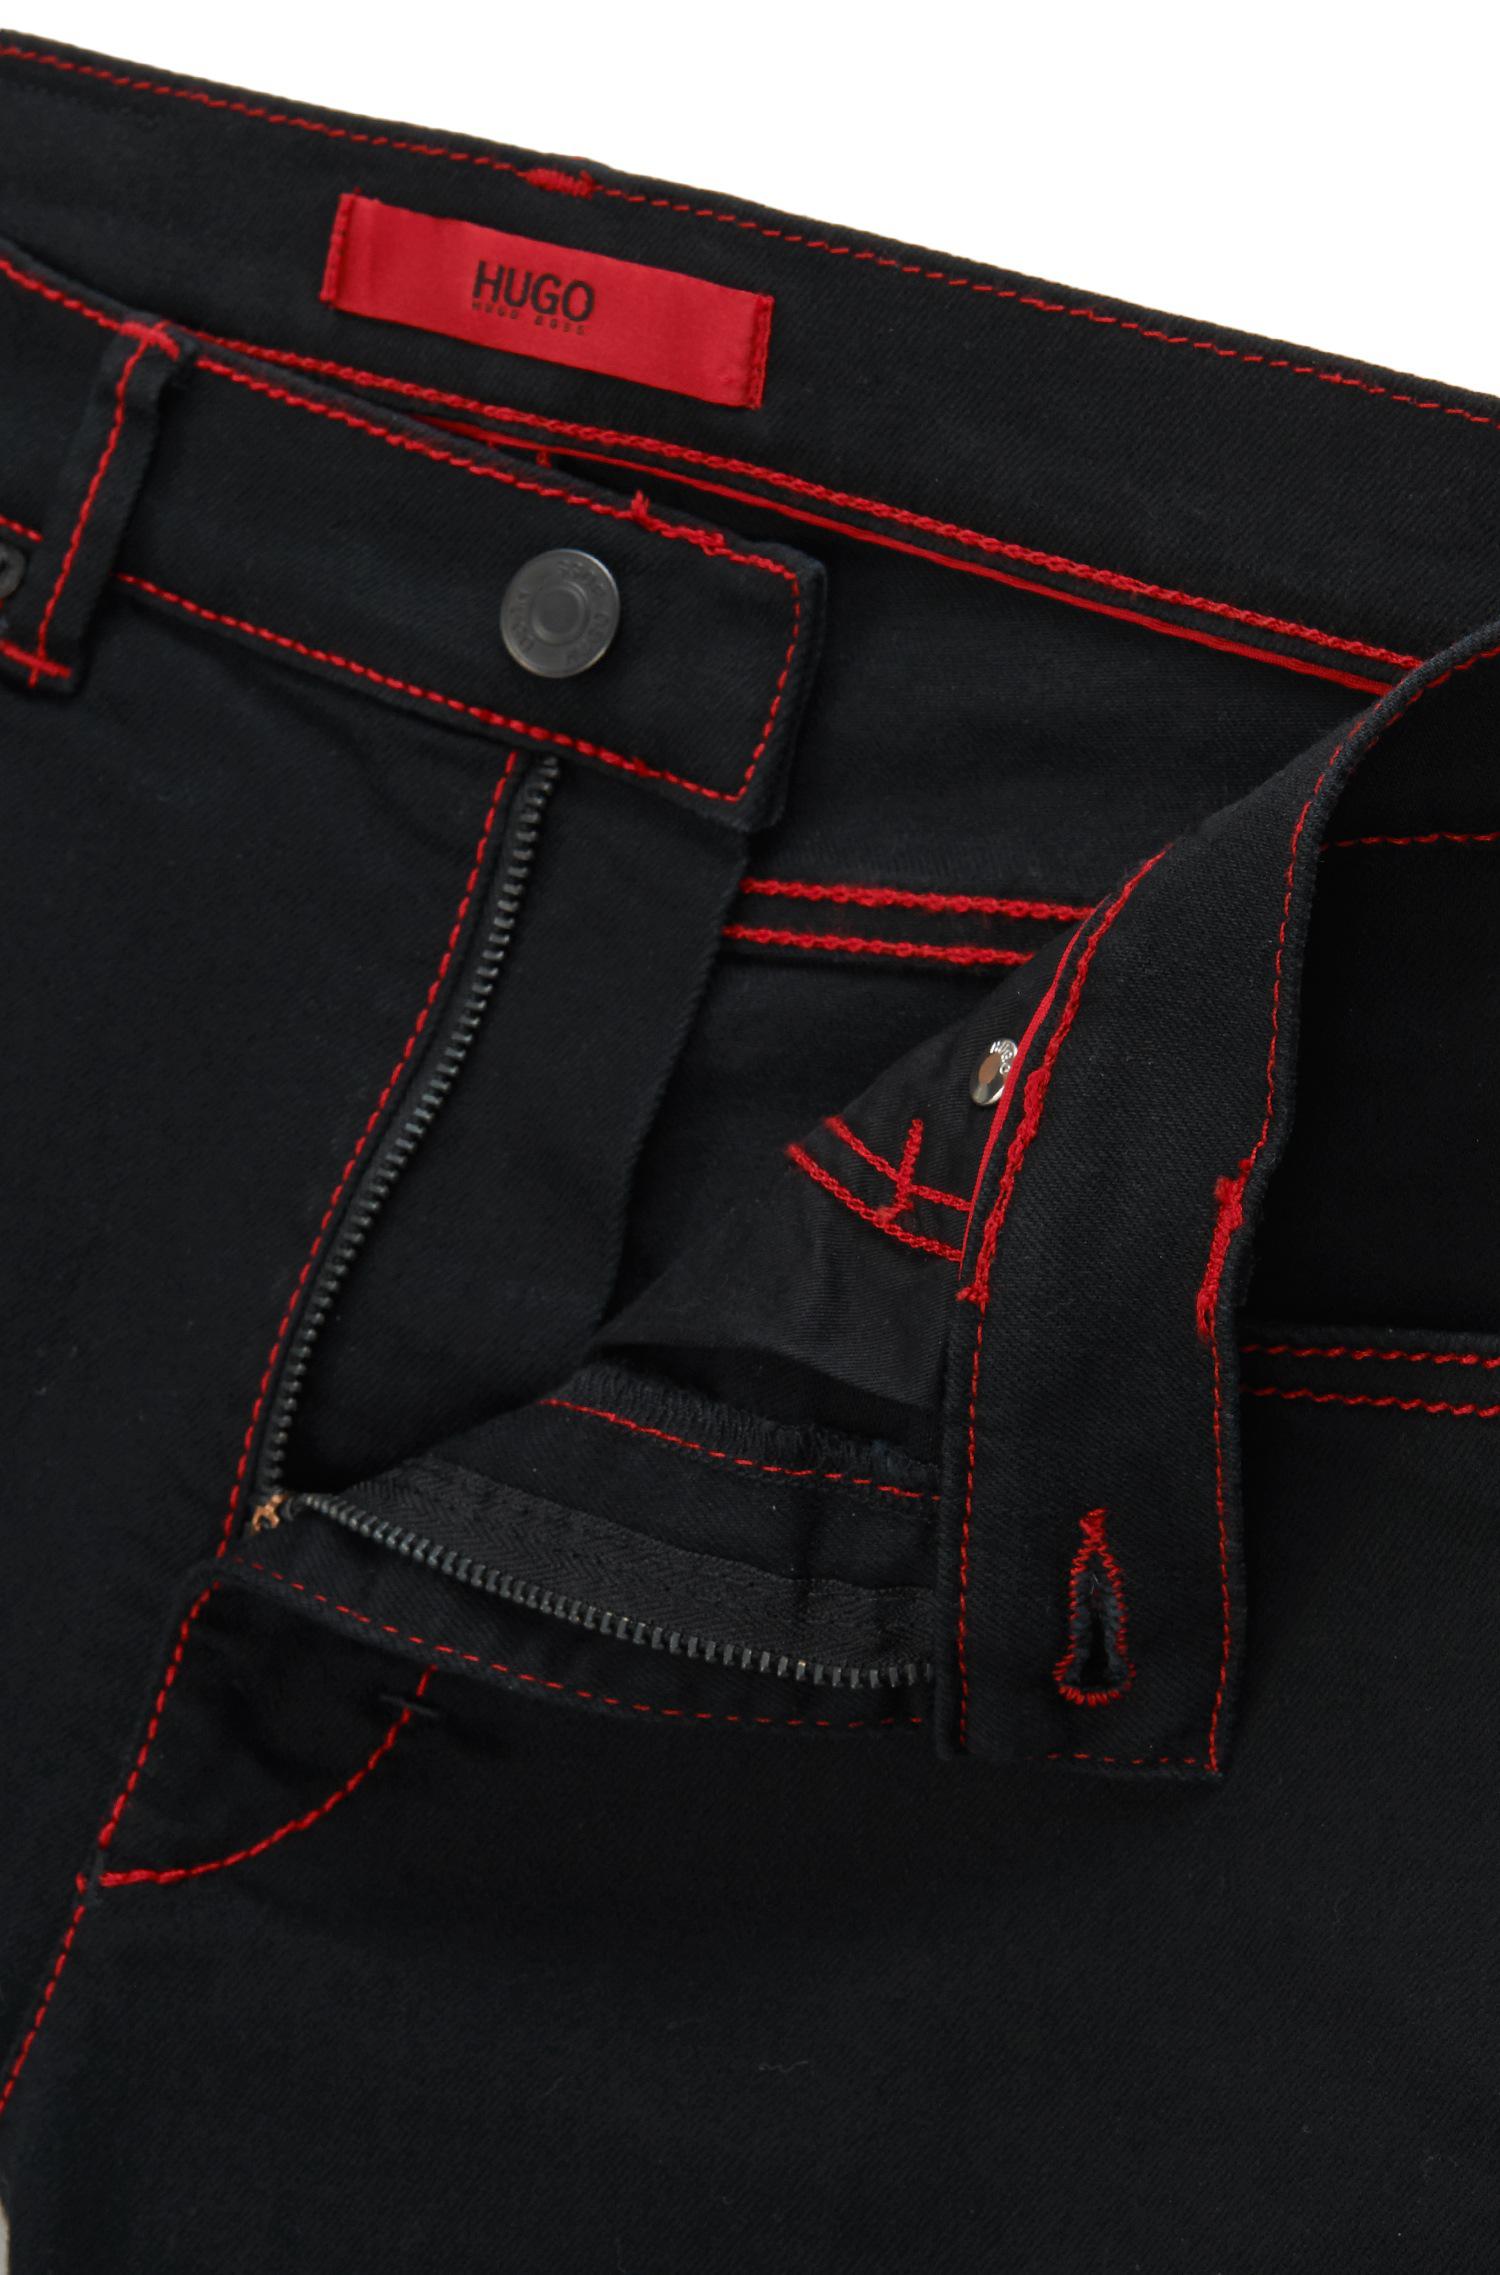 HUGO Denim Skinny-fit Jeans With Red Stitching in Black for Men - Lyst